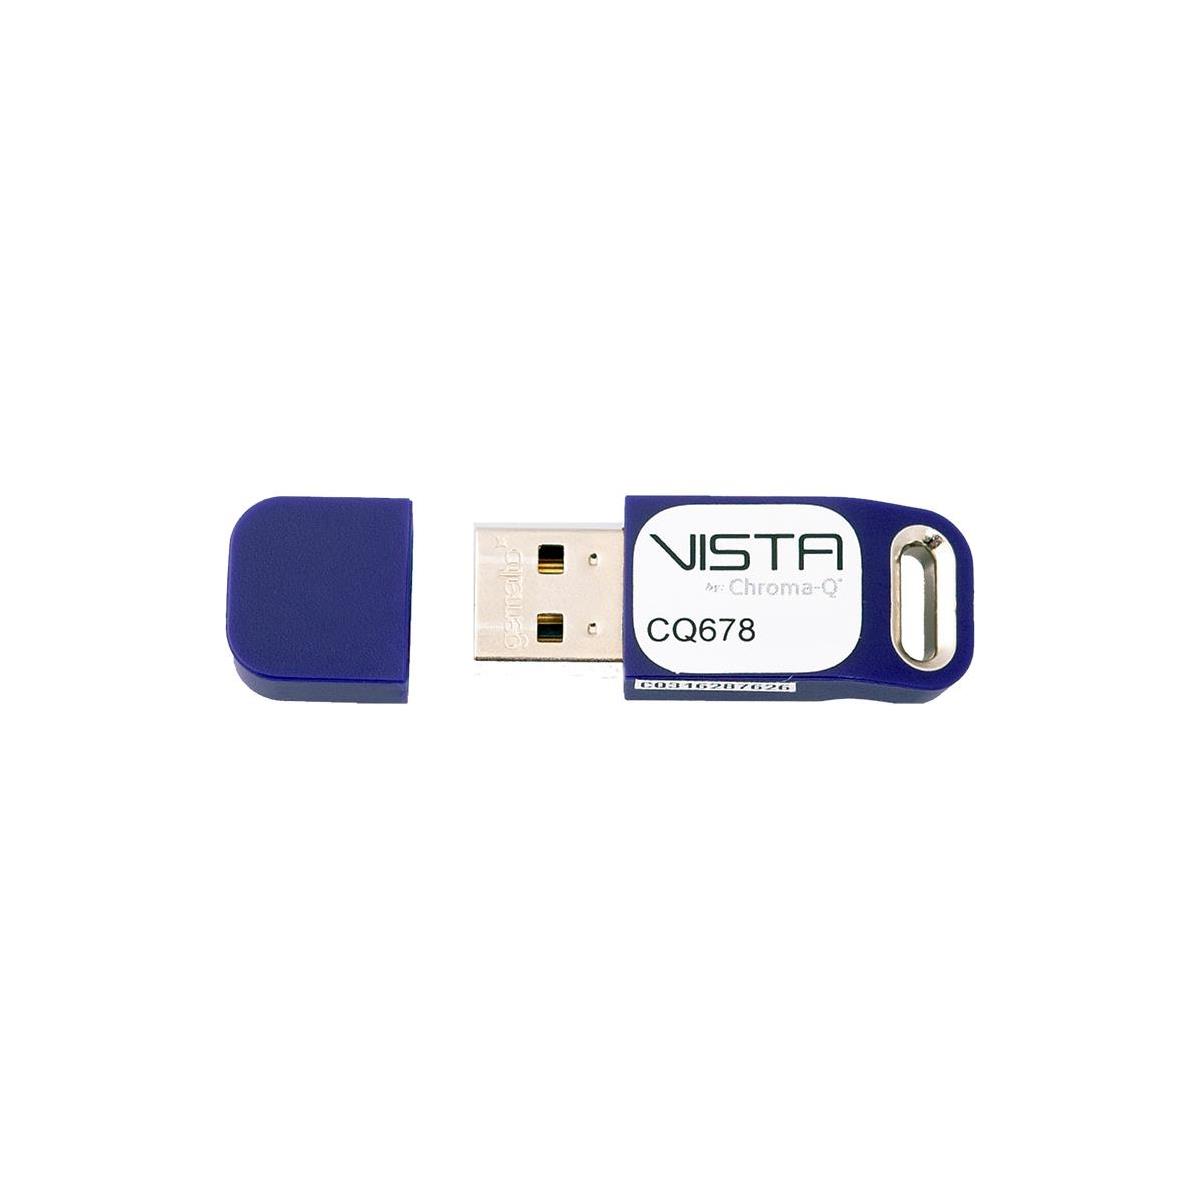 Image of Chroma-Q Vista 8192-Channel Dongle